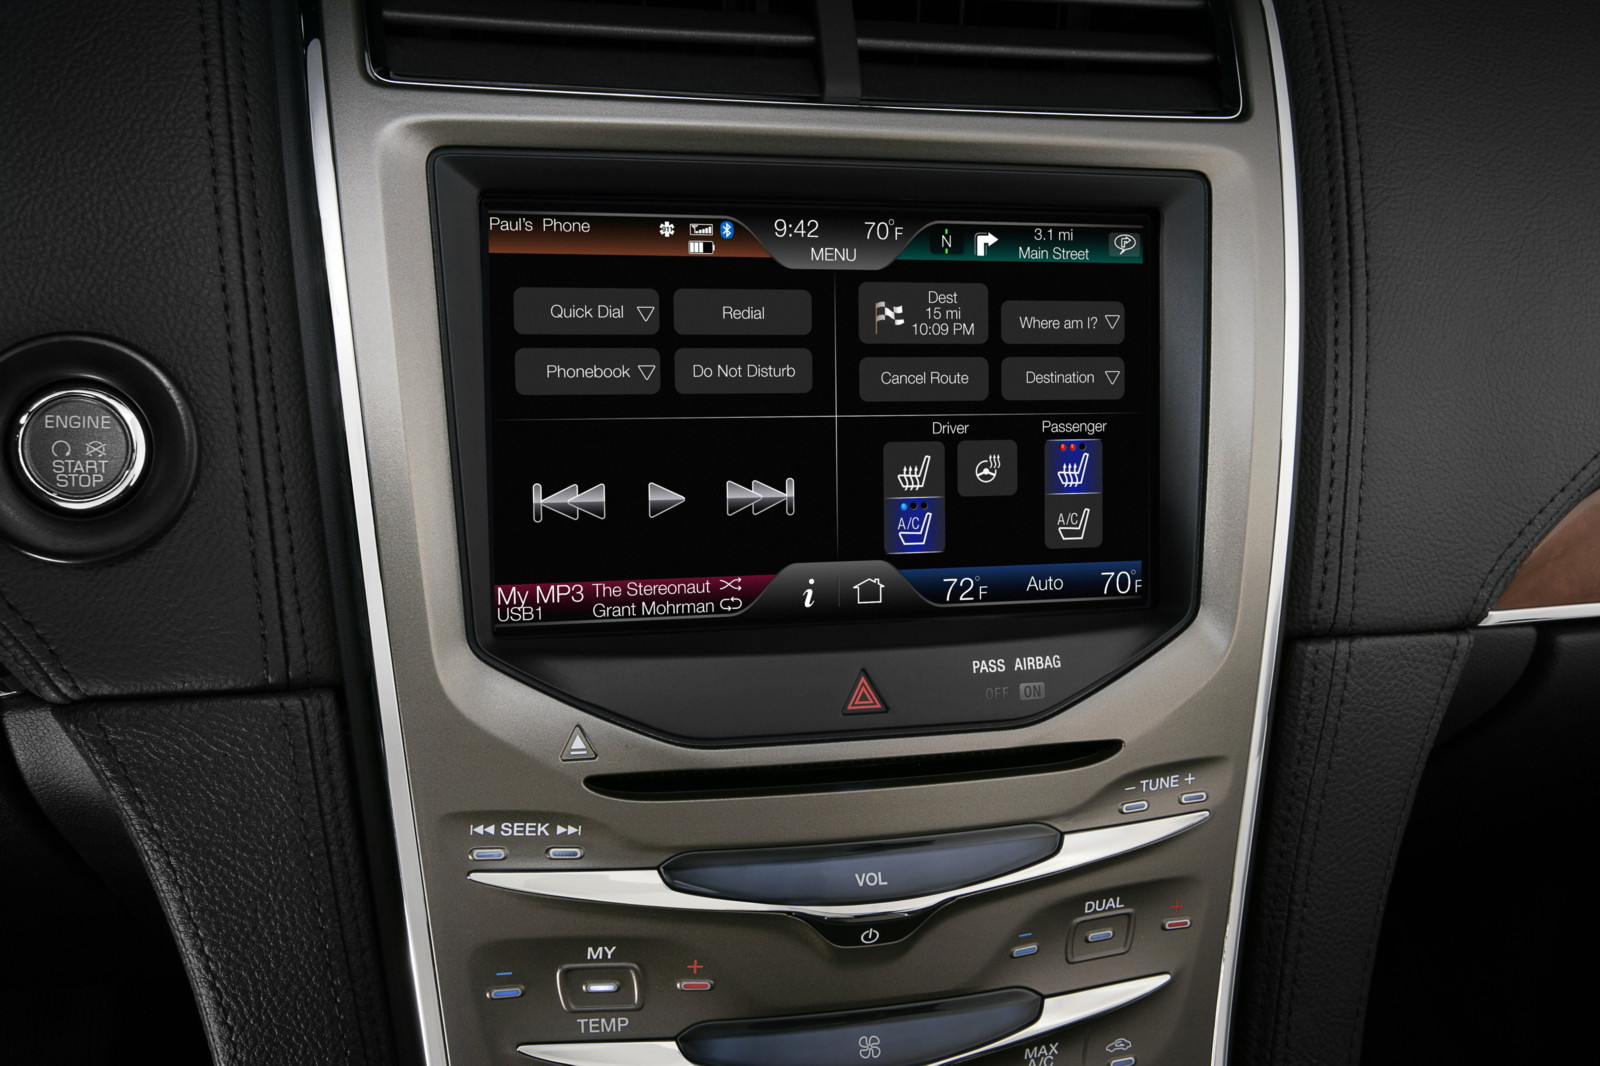 Itunes Tagging Comes To Hd Radio In The 2011 Lincoln Mkx